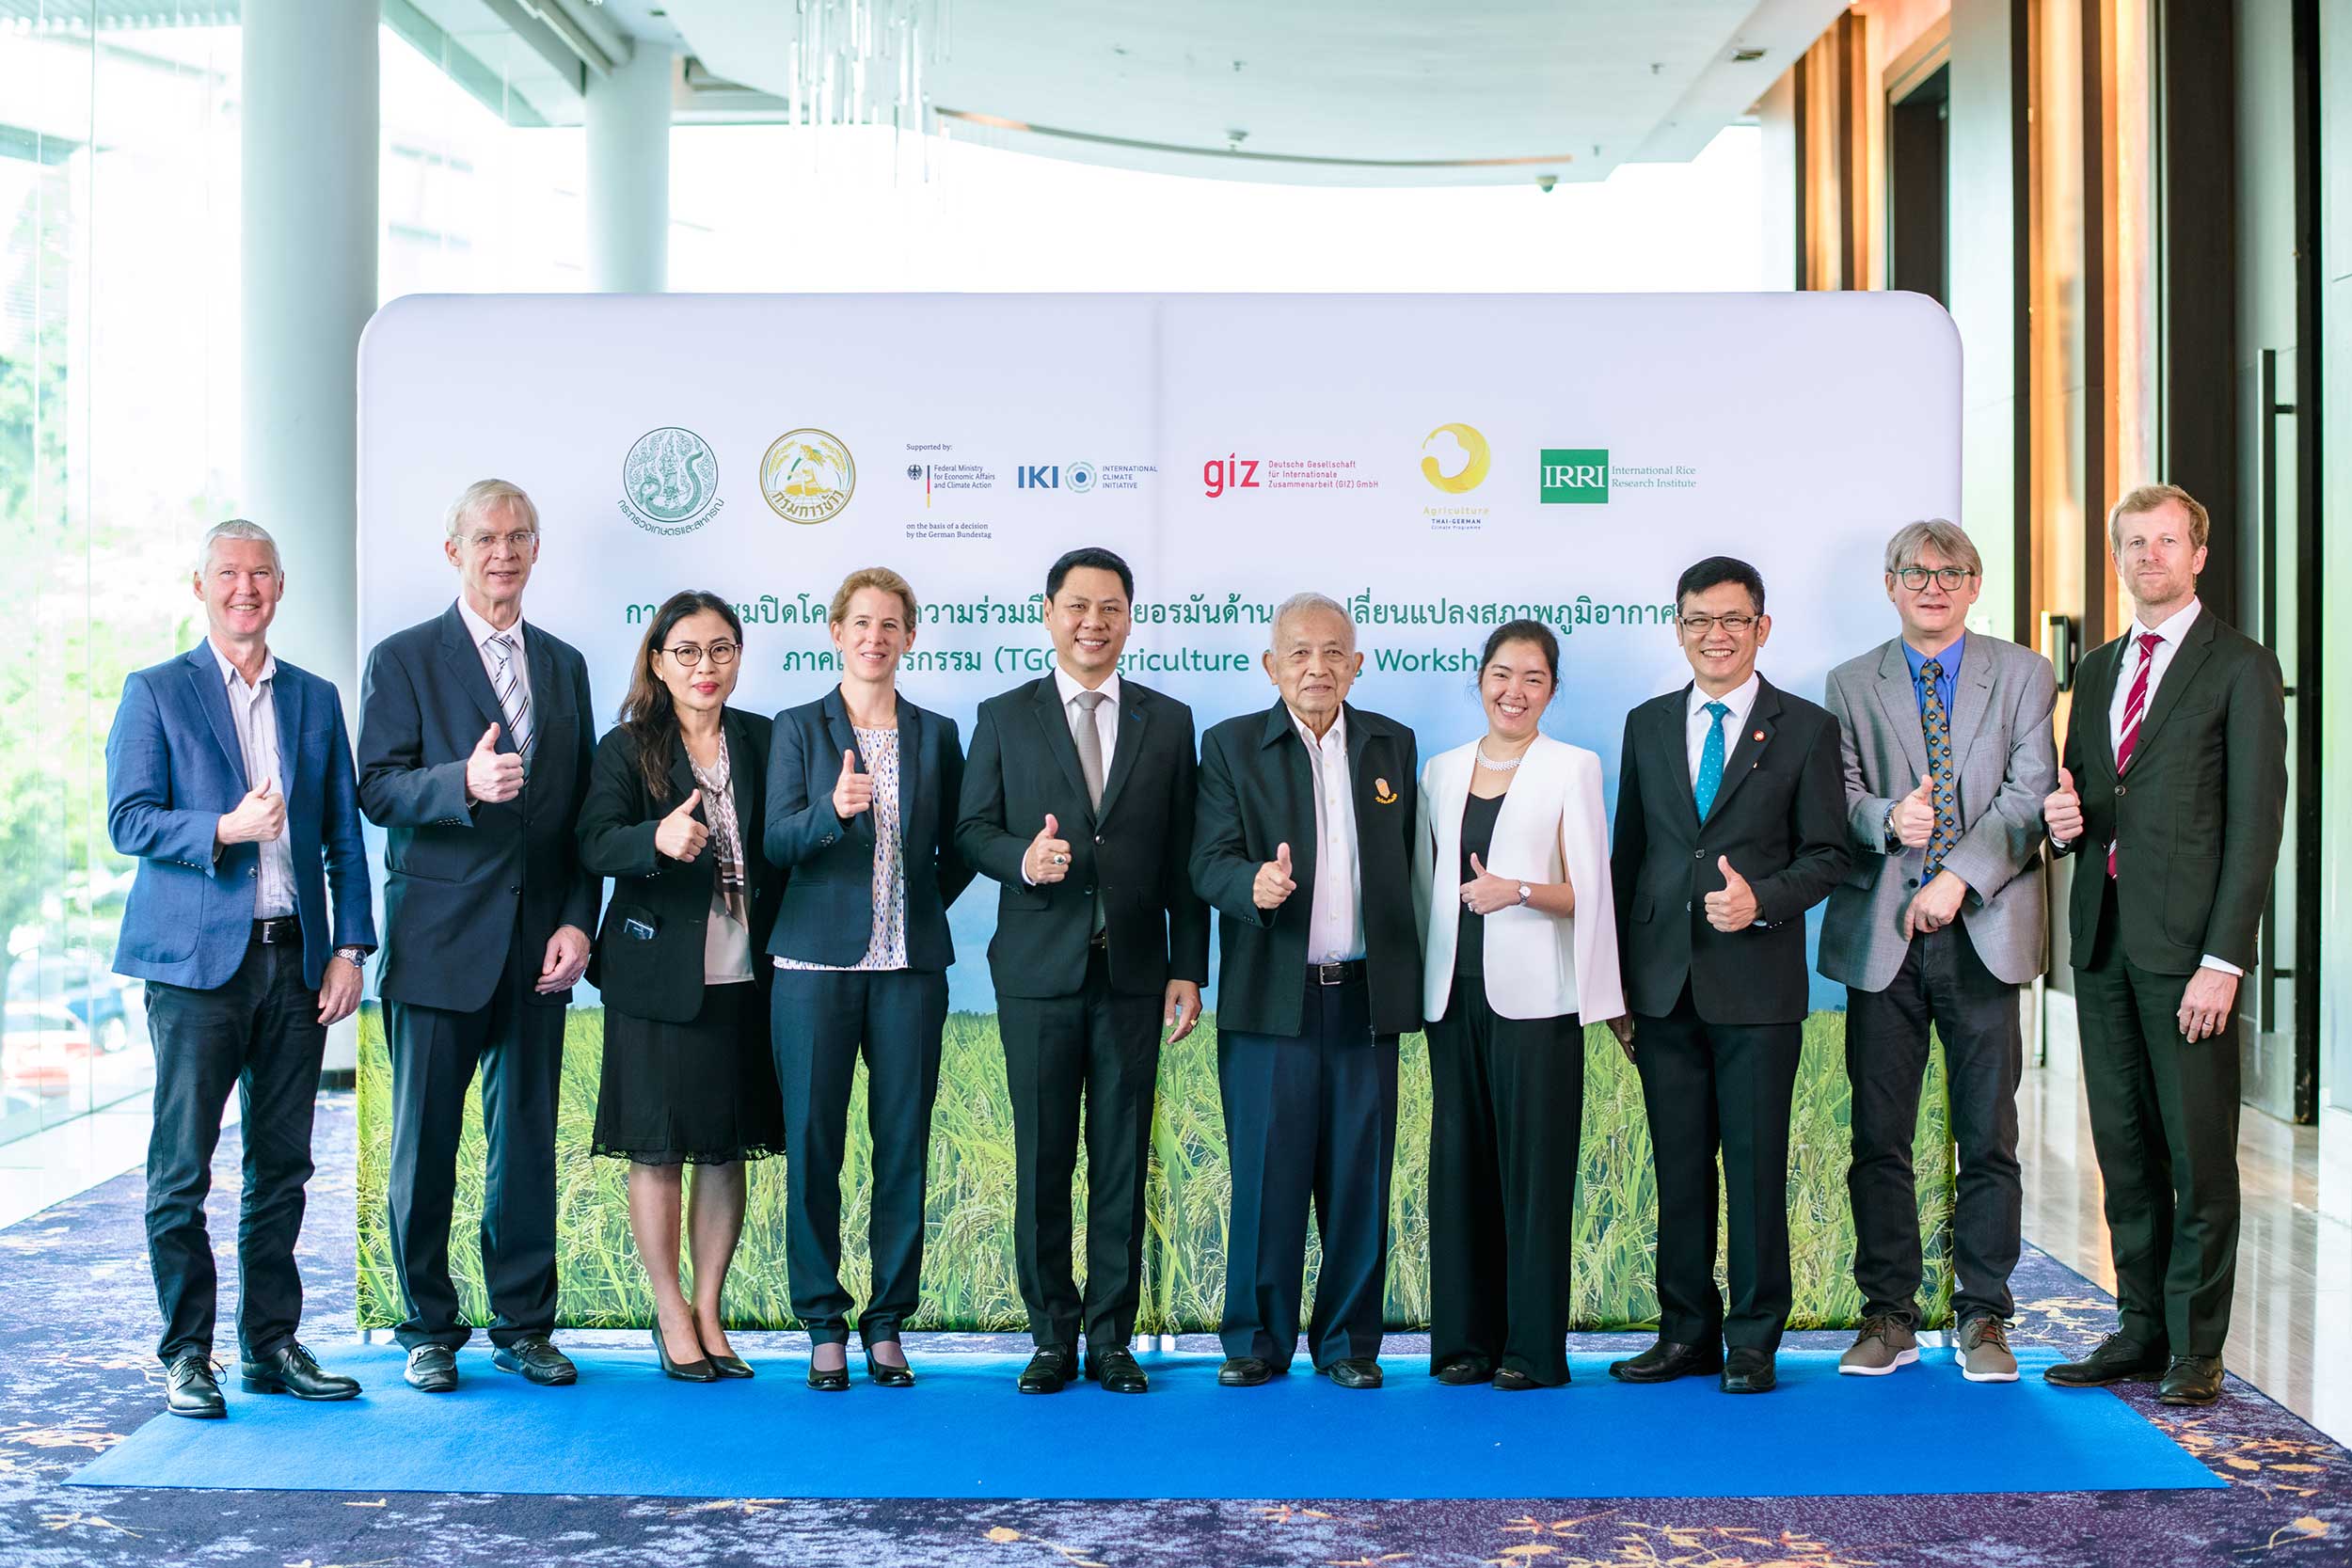 Straw management helps Thai farmers reduce costs and climate change impacts  – Thai-German Cooperation